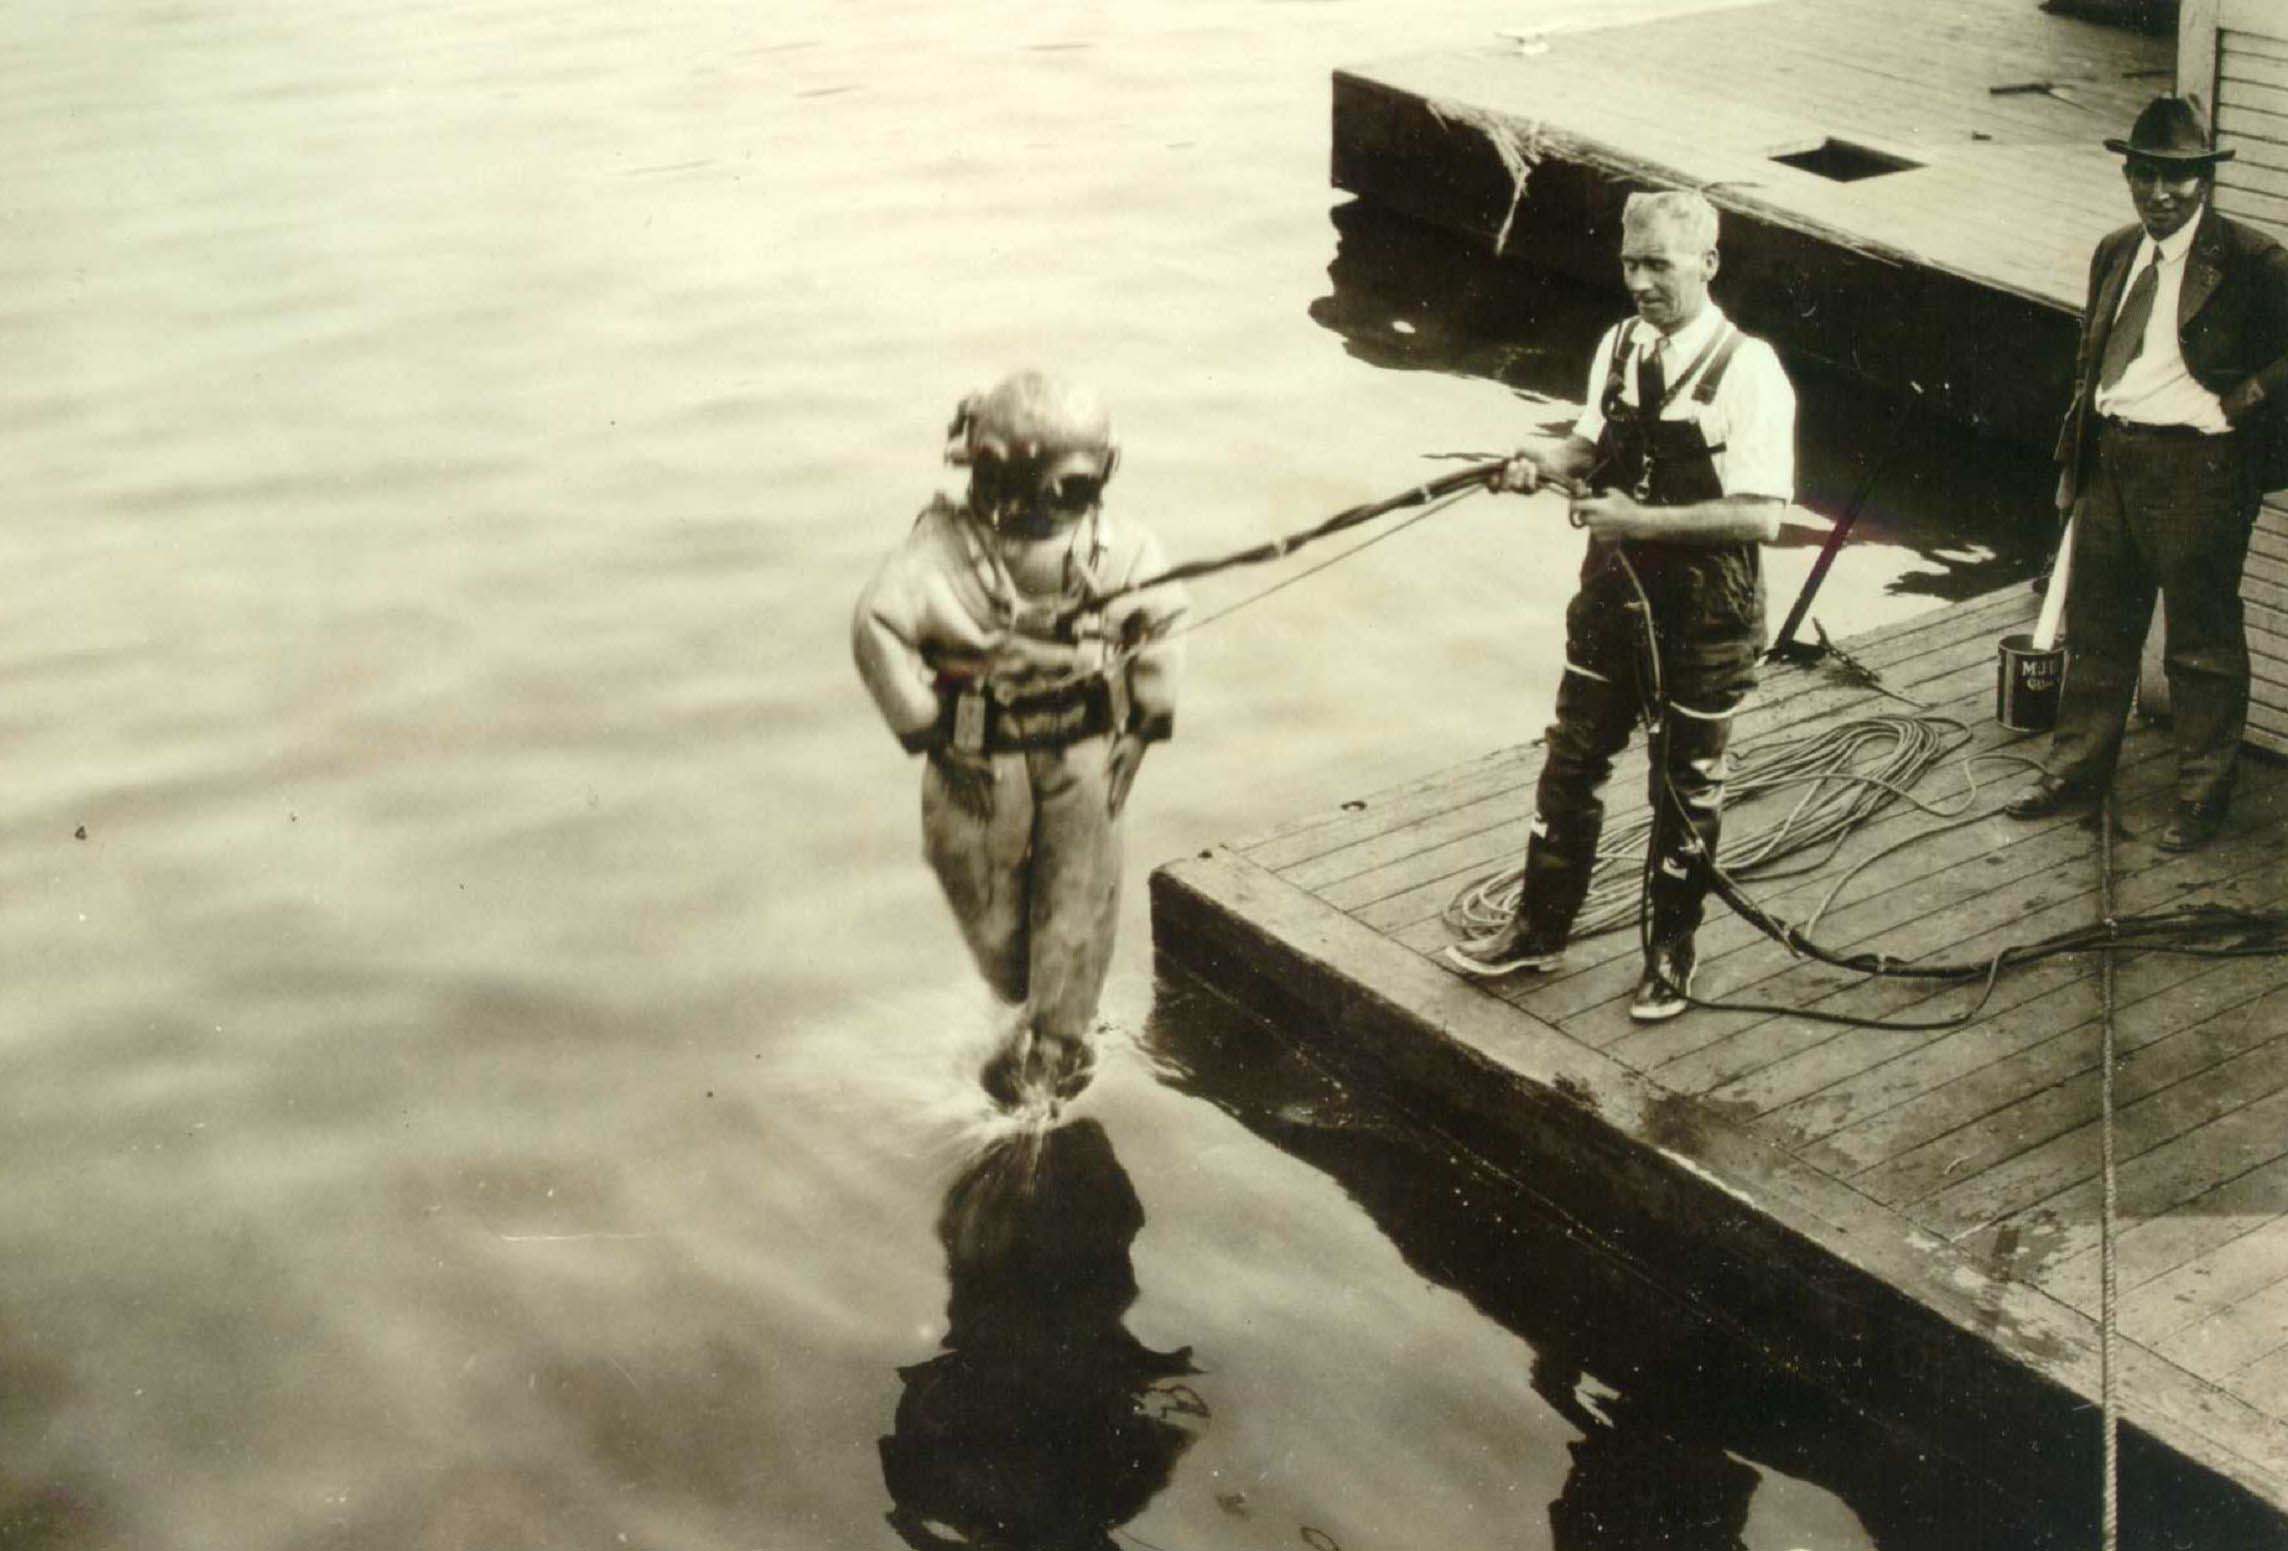 Two men standing on a dock while another in a diving suit is plunging feet first into the water. Once on the men his holding tubes and cables attached to the diving suit.